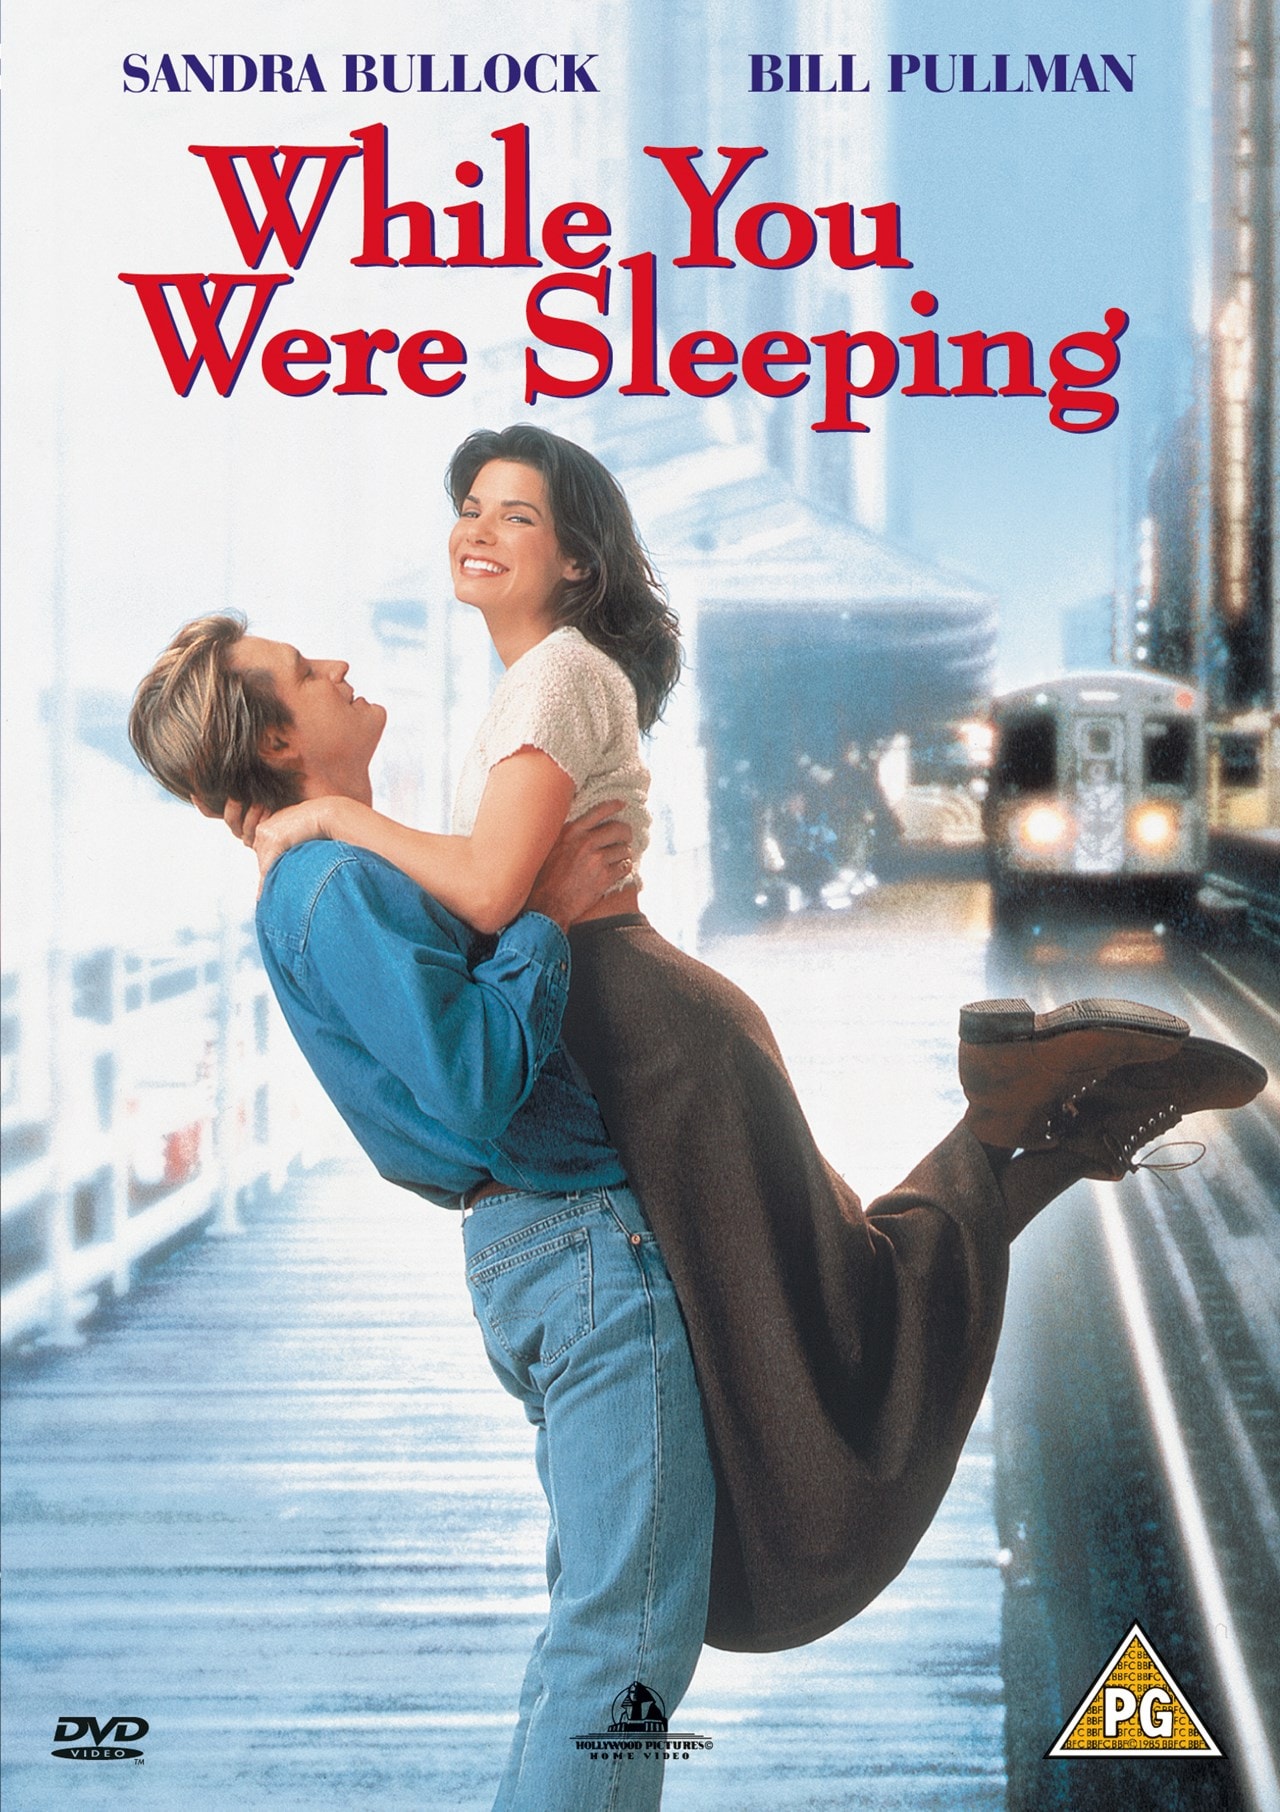 While You Were Sleeping | DVD | Free shipping over £20 ...